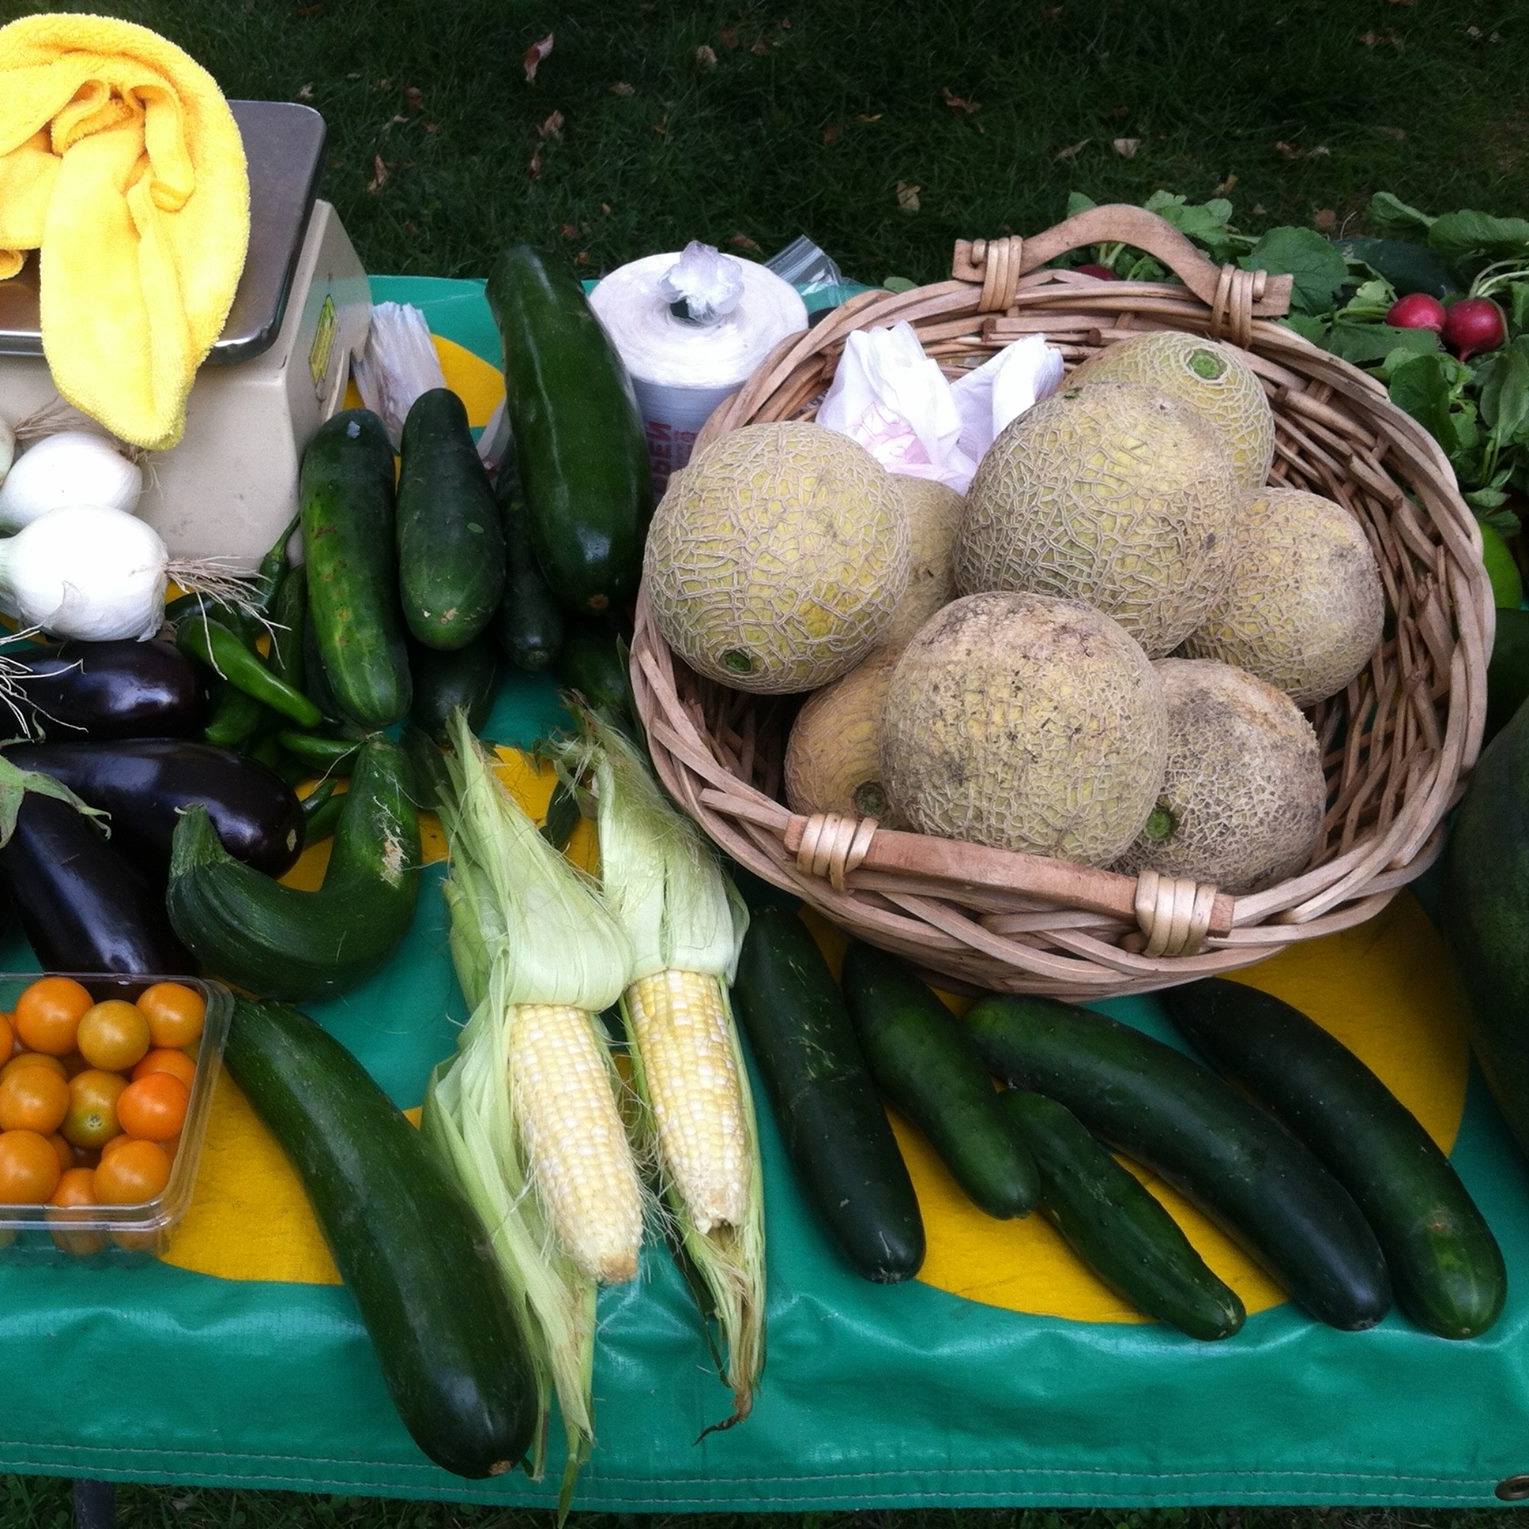 image of produce at Bennet Farmers' Market